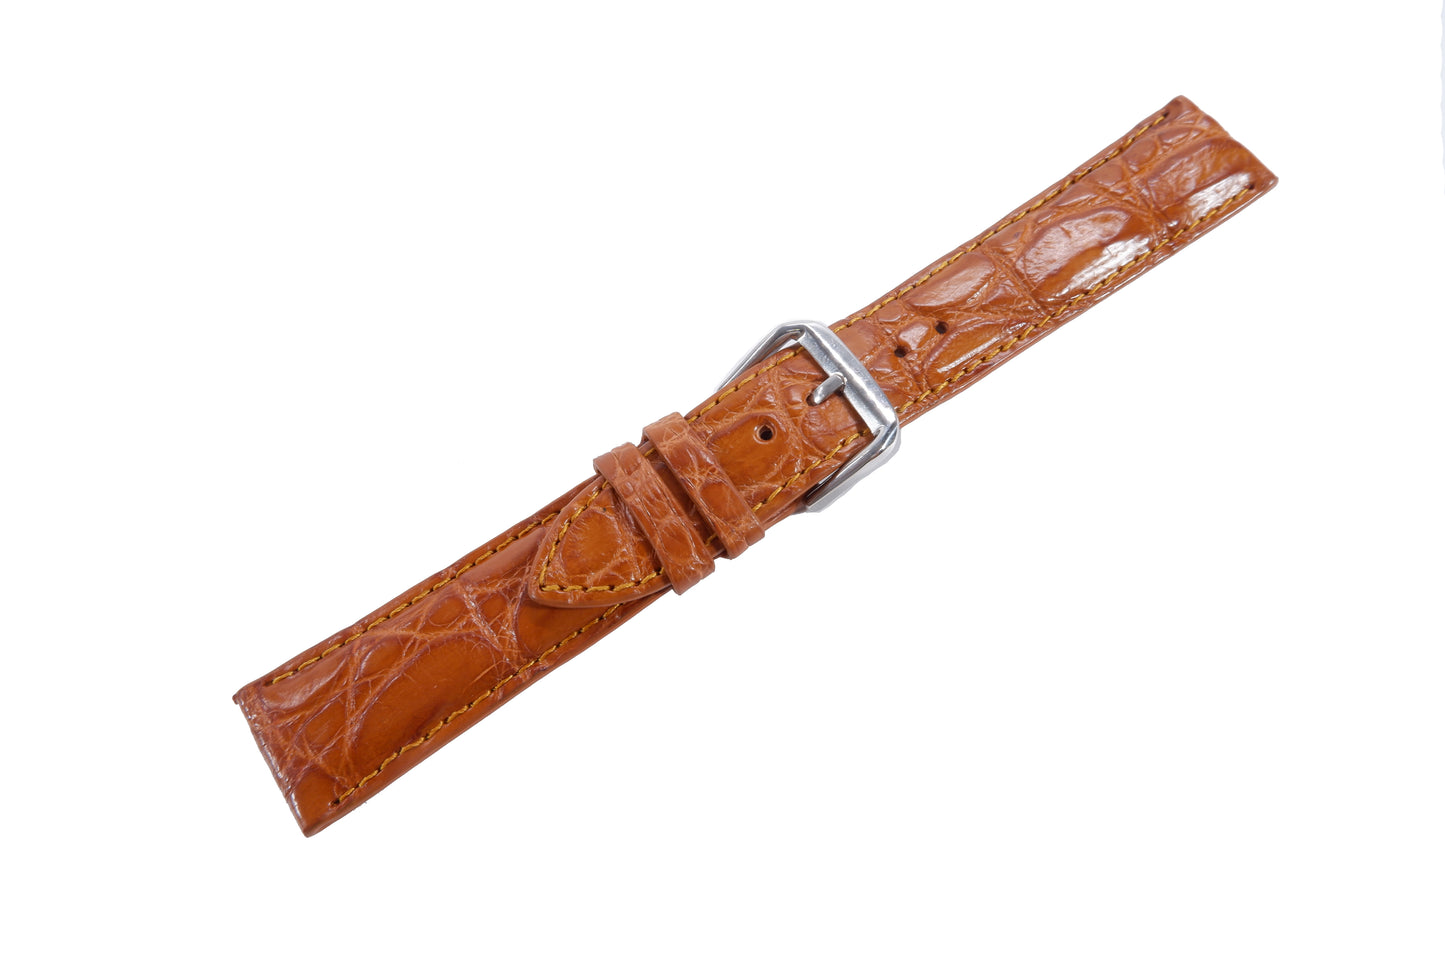 Genuine Crocodile Skin Leather Watch Strap Brown Band with Buckle